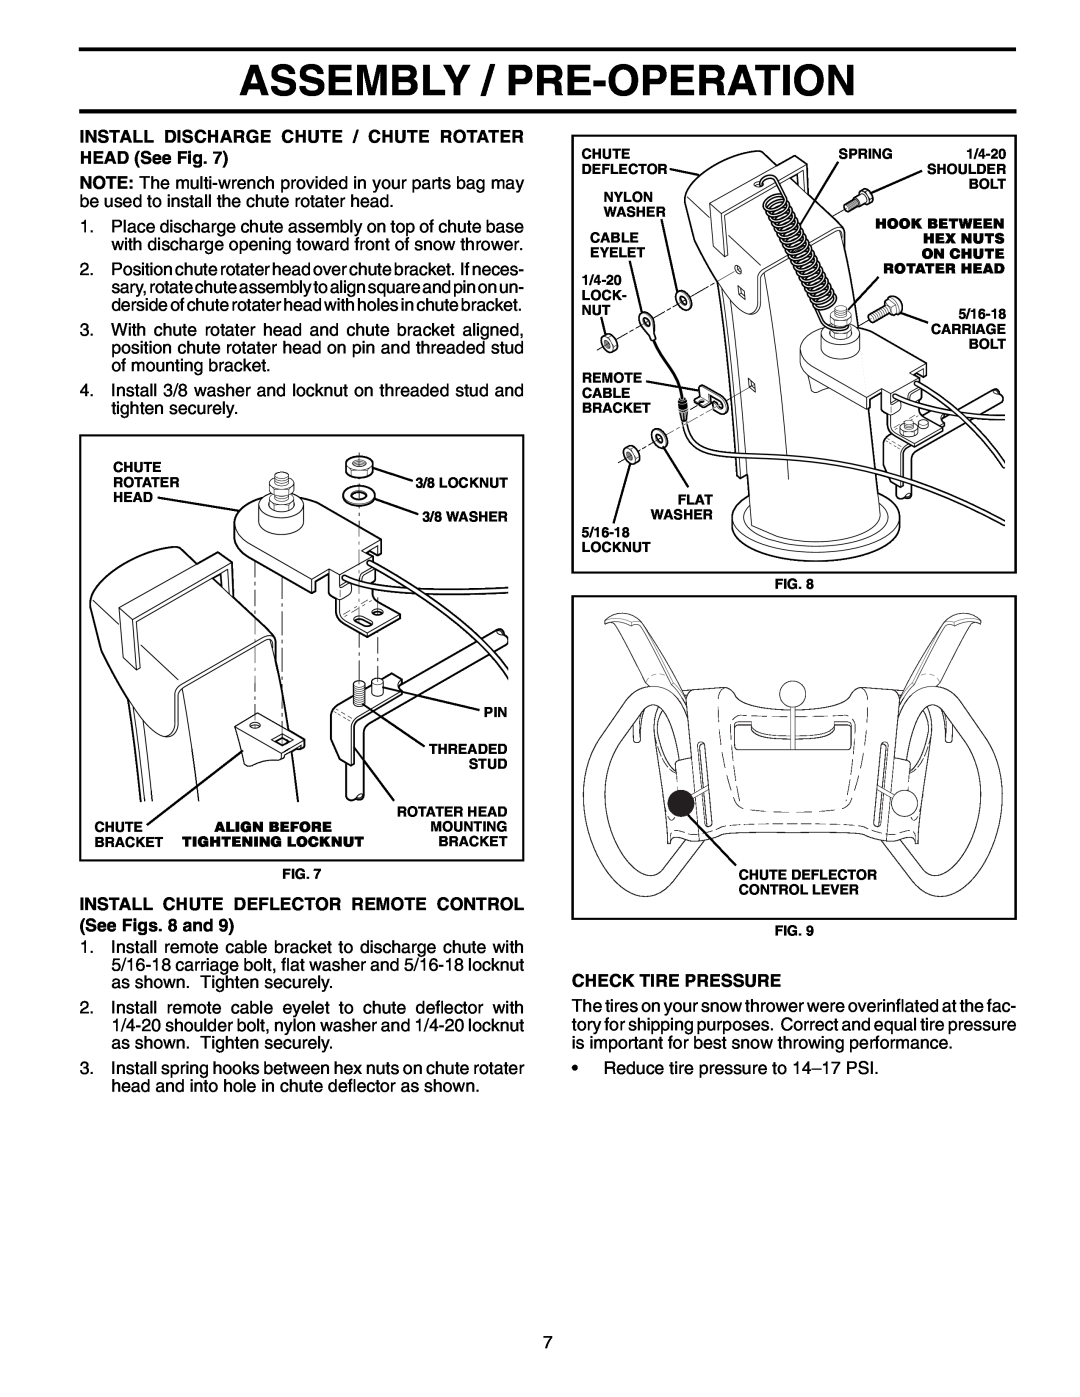 Poulan 961970004 Assembly / Pre-Operation, INSTALL DISCHARGE CHUTE / CHUTE ROTATER HEAD See Fig, Check Tire Pressure 